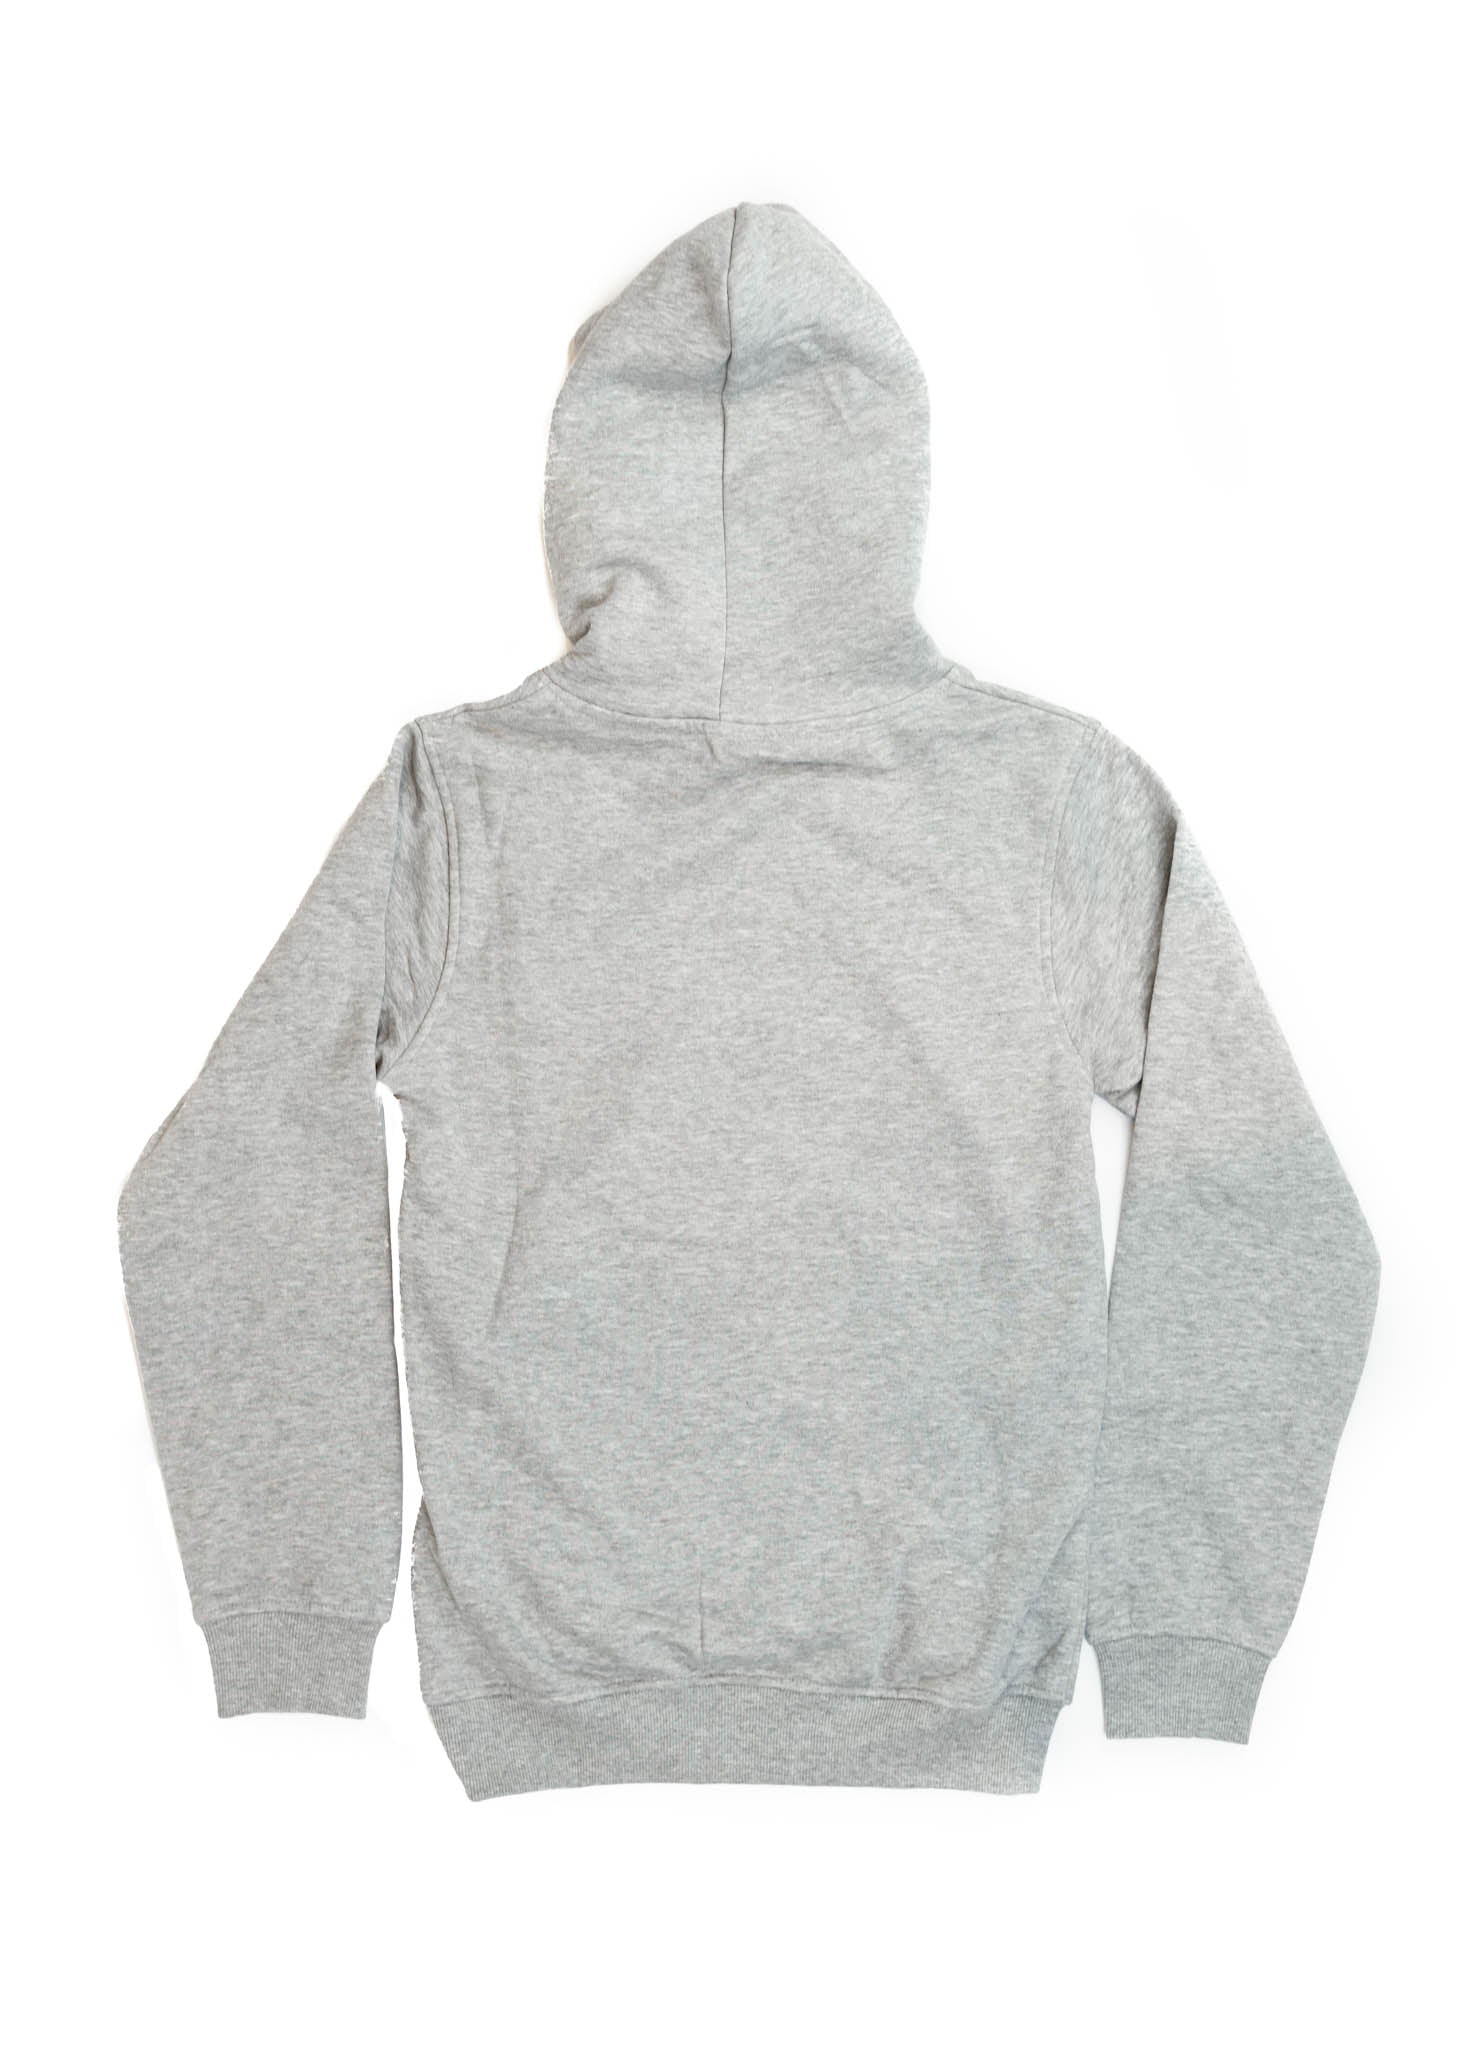 A light grey unisex hoodie for men and women. Full size view of the back side of a gray sweater with a nardo grey embroidered 8V RS3. Fabric composition is cotton, polyester, and rayon. The material is very soft, stretchy, and non-transparent. The style of this hoodie is long sleeve, crewneck with a hood, hooded, with embroidery on the left chest.